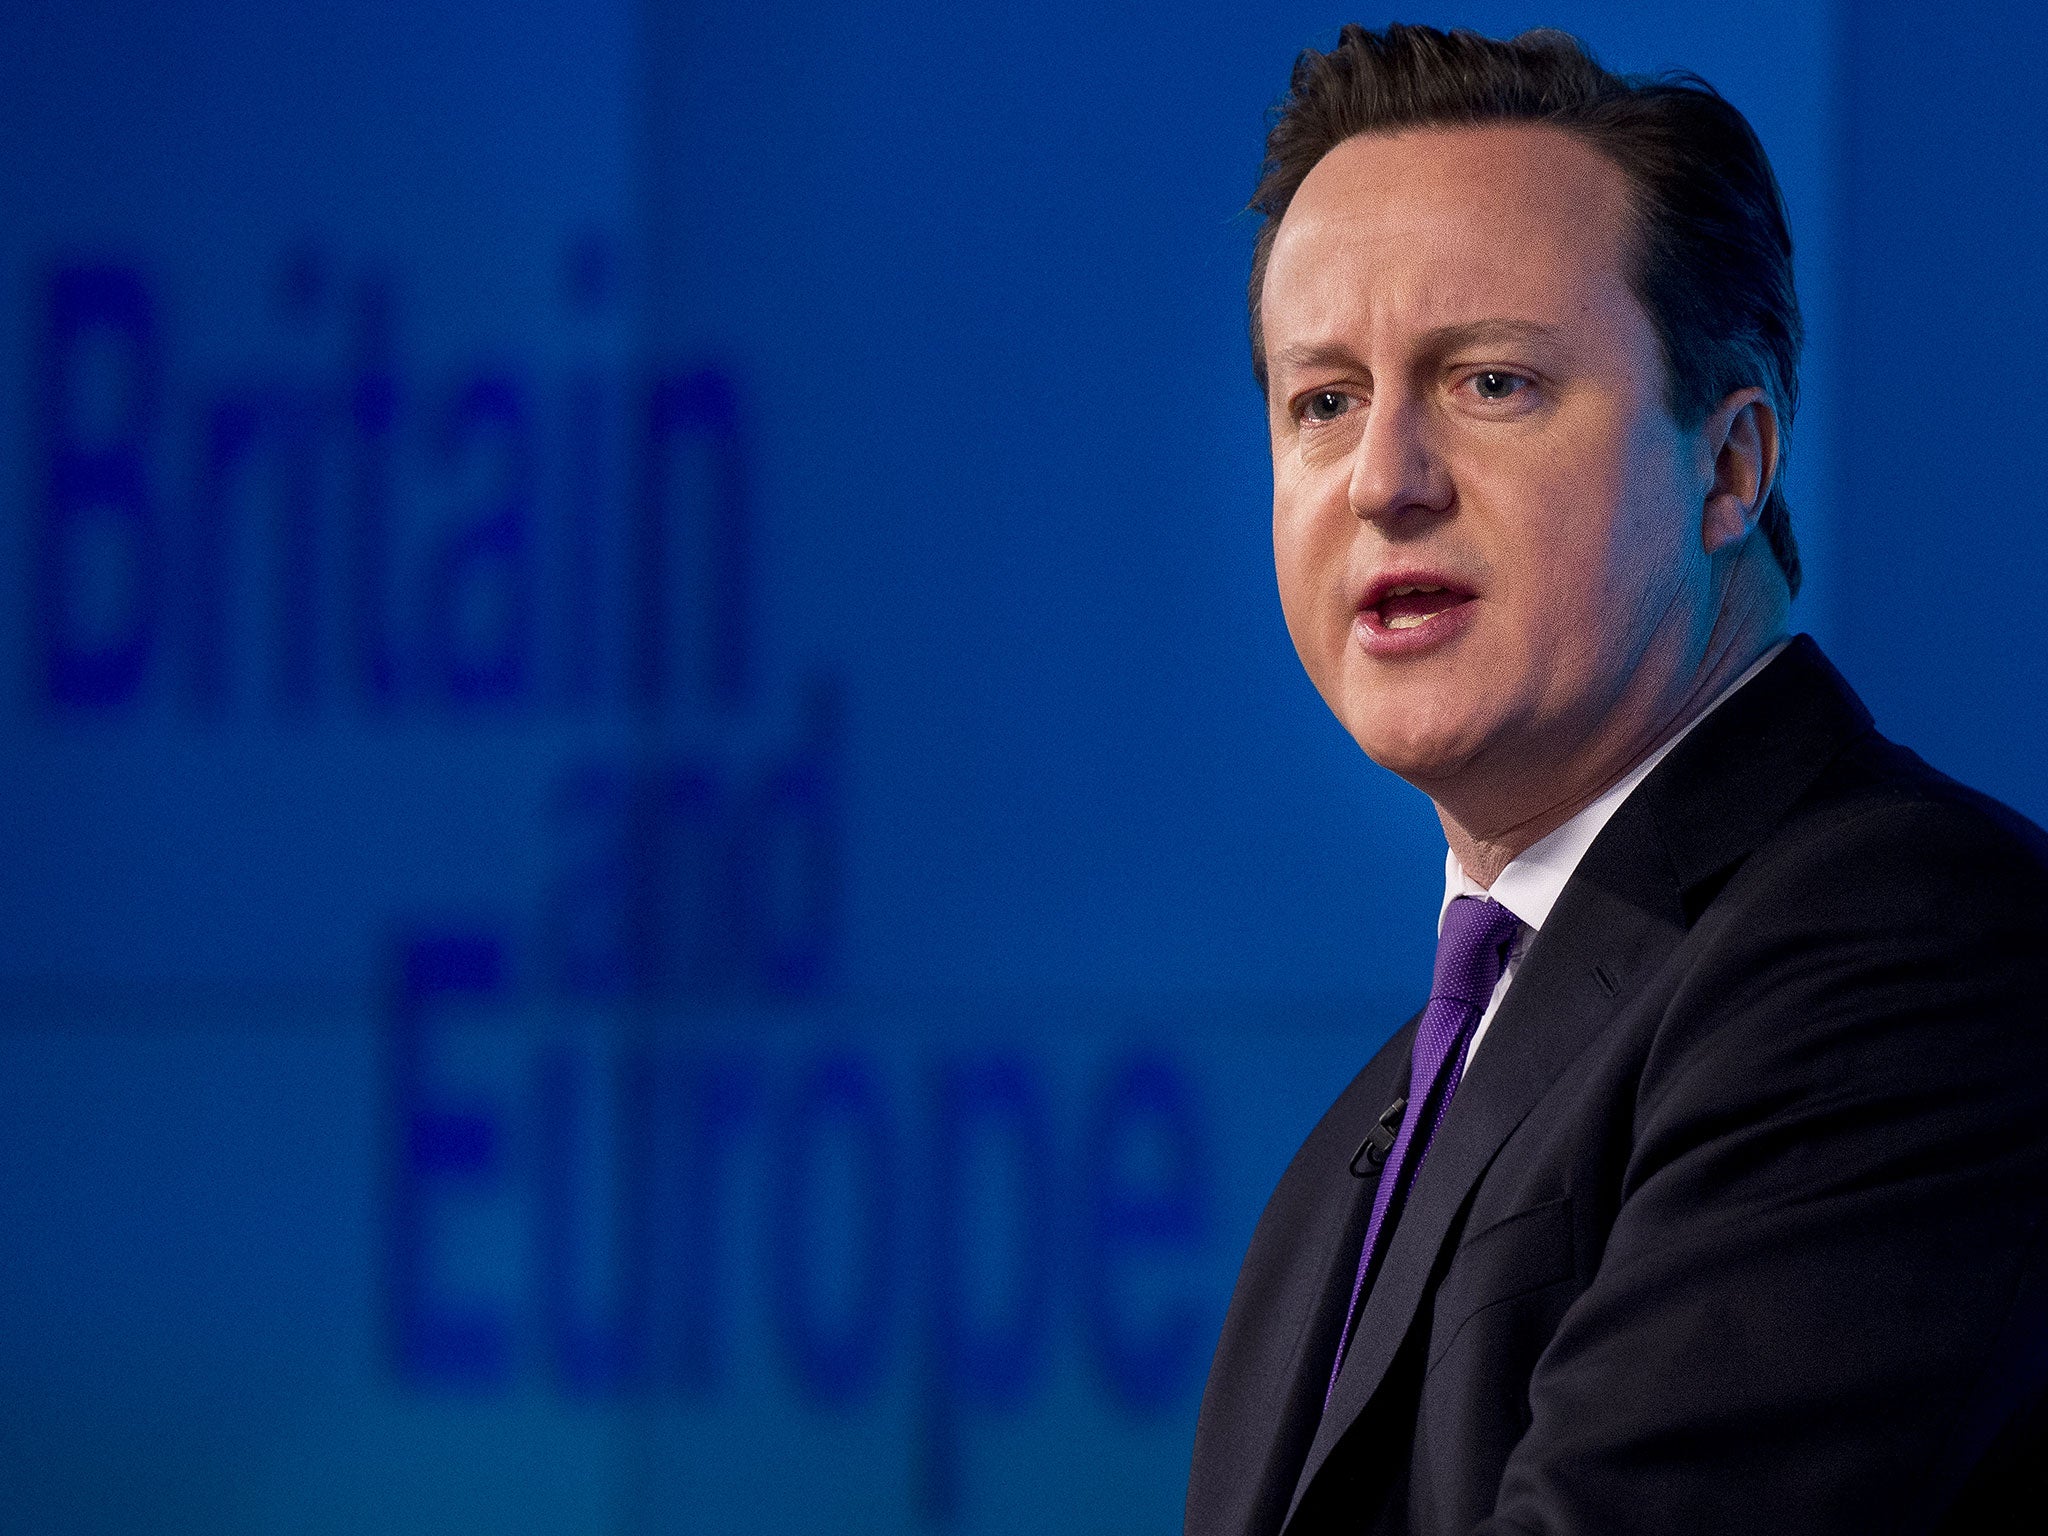 David Cameron delivers a speech on 'the future of the European Union and Britain's role within it'